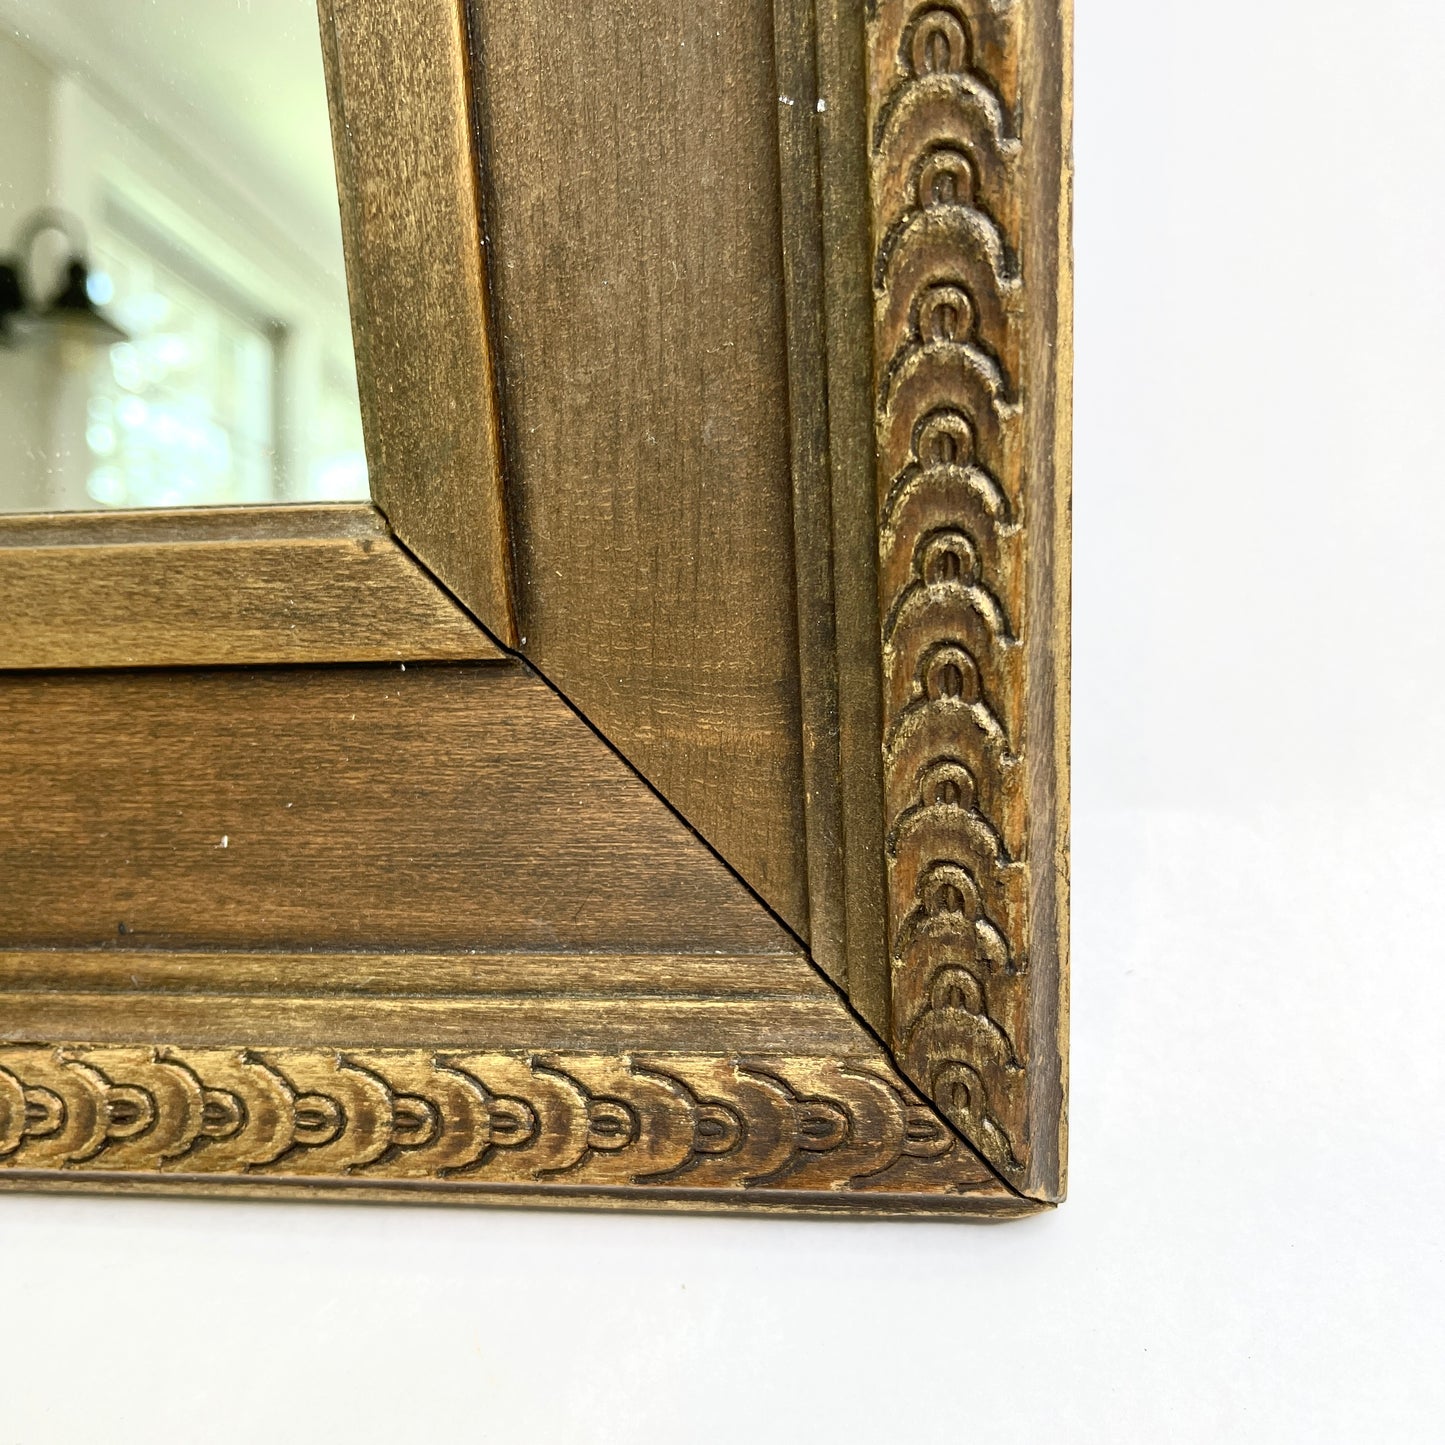 Antique Wood Mirror with Carved Frame